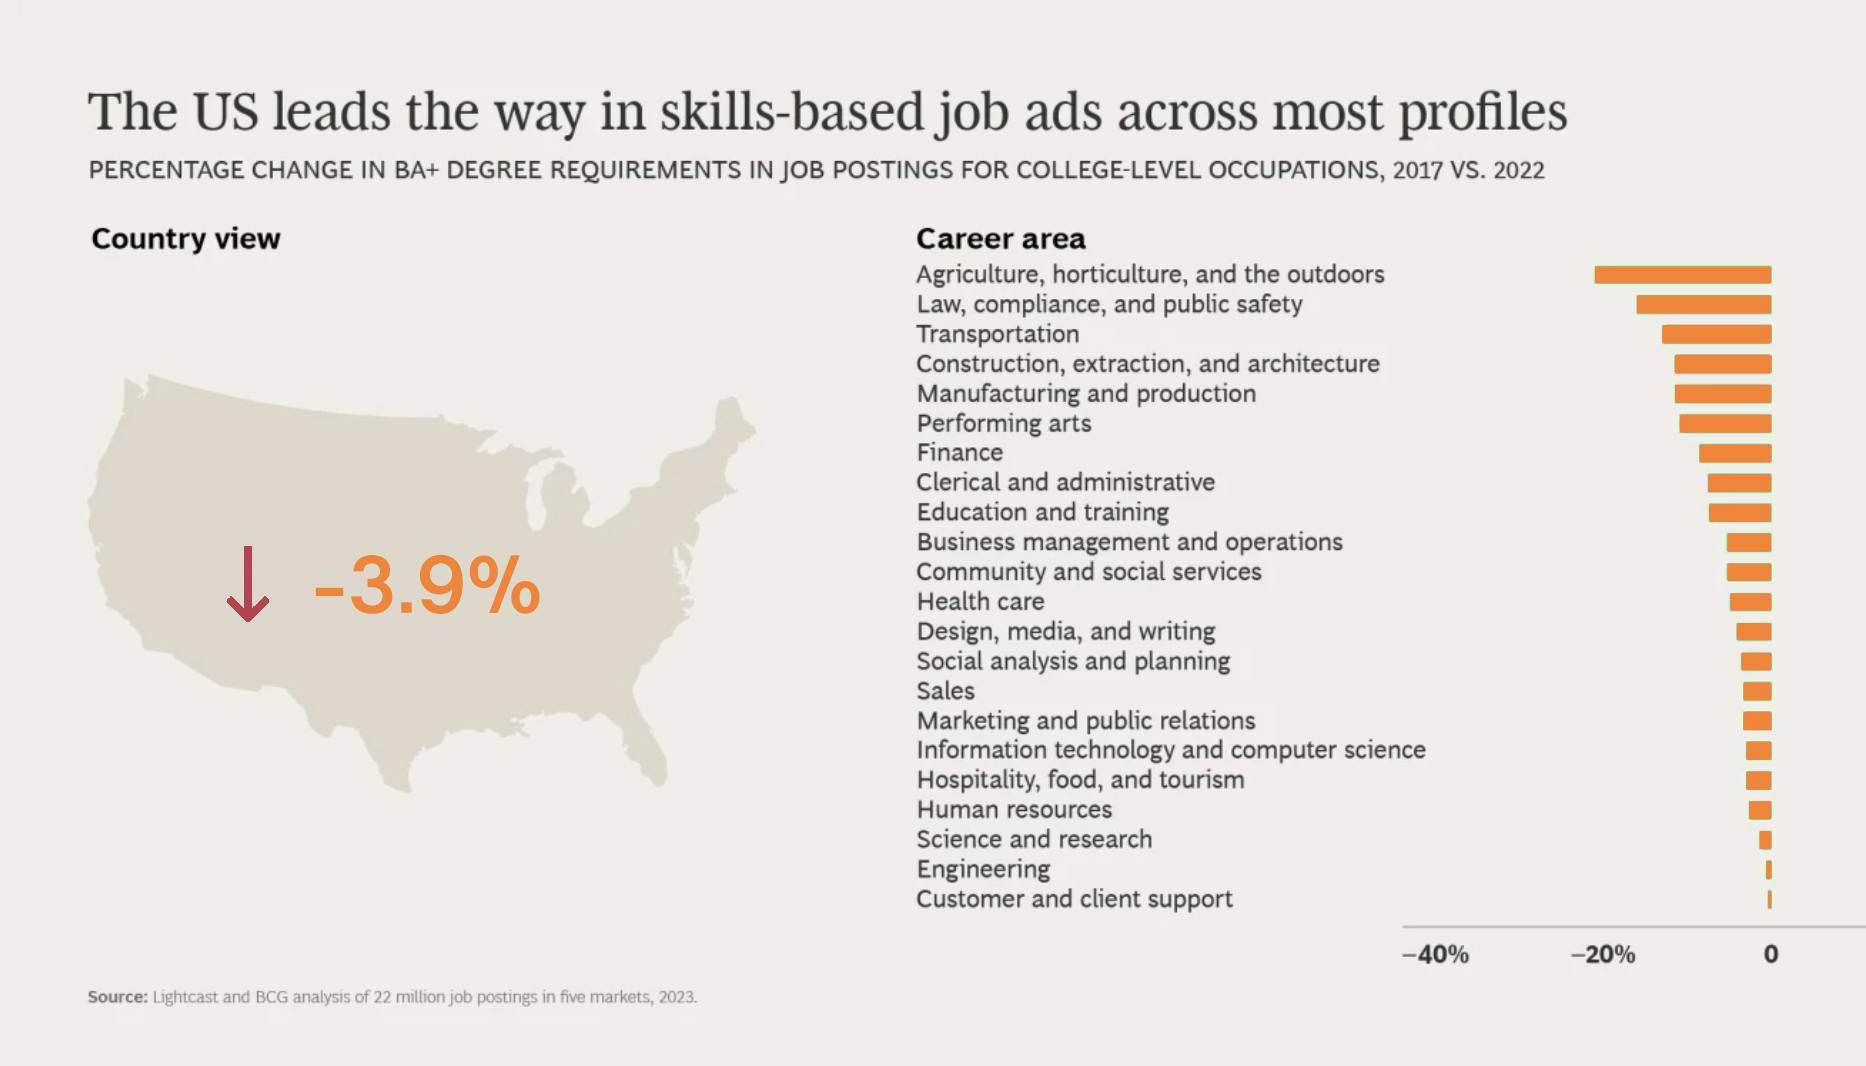 The US leads the way in skills-based hiring; with degree requests down 3.9% overall